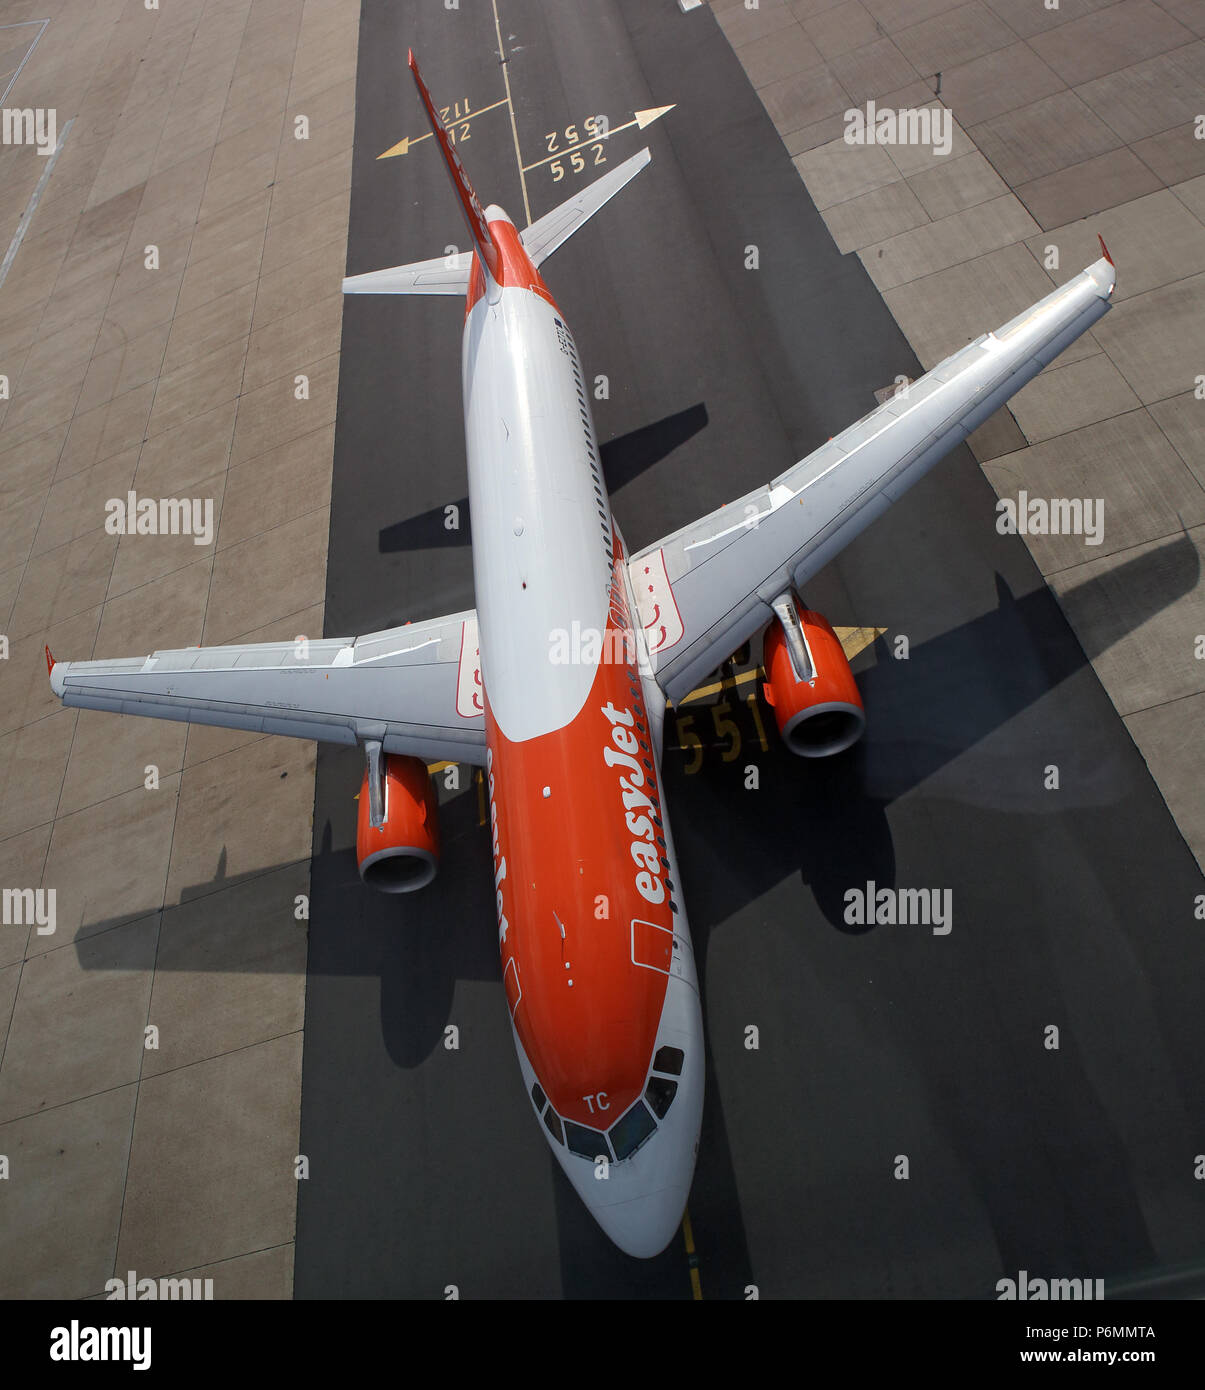 London, United Kingdom, Airbus A 320 of the easyJet airline on the London Gatwick airport taxiway Stock Photo